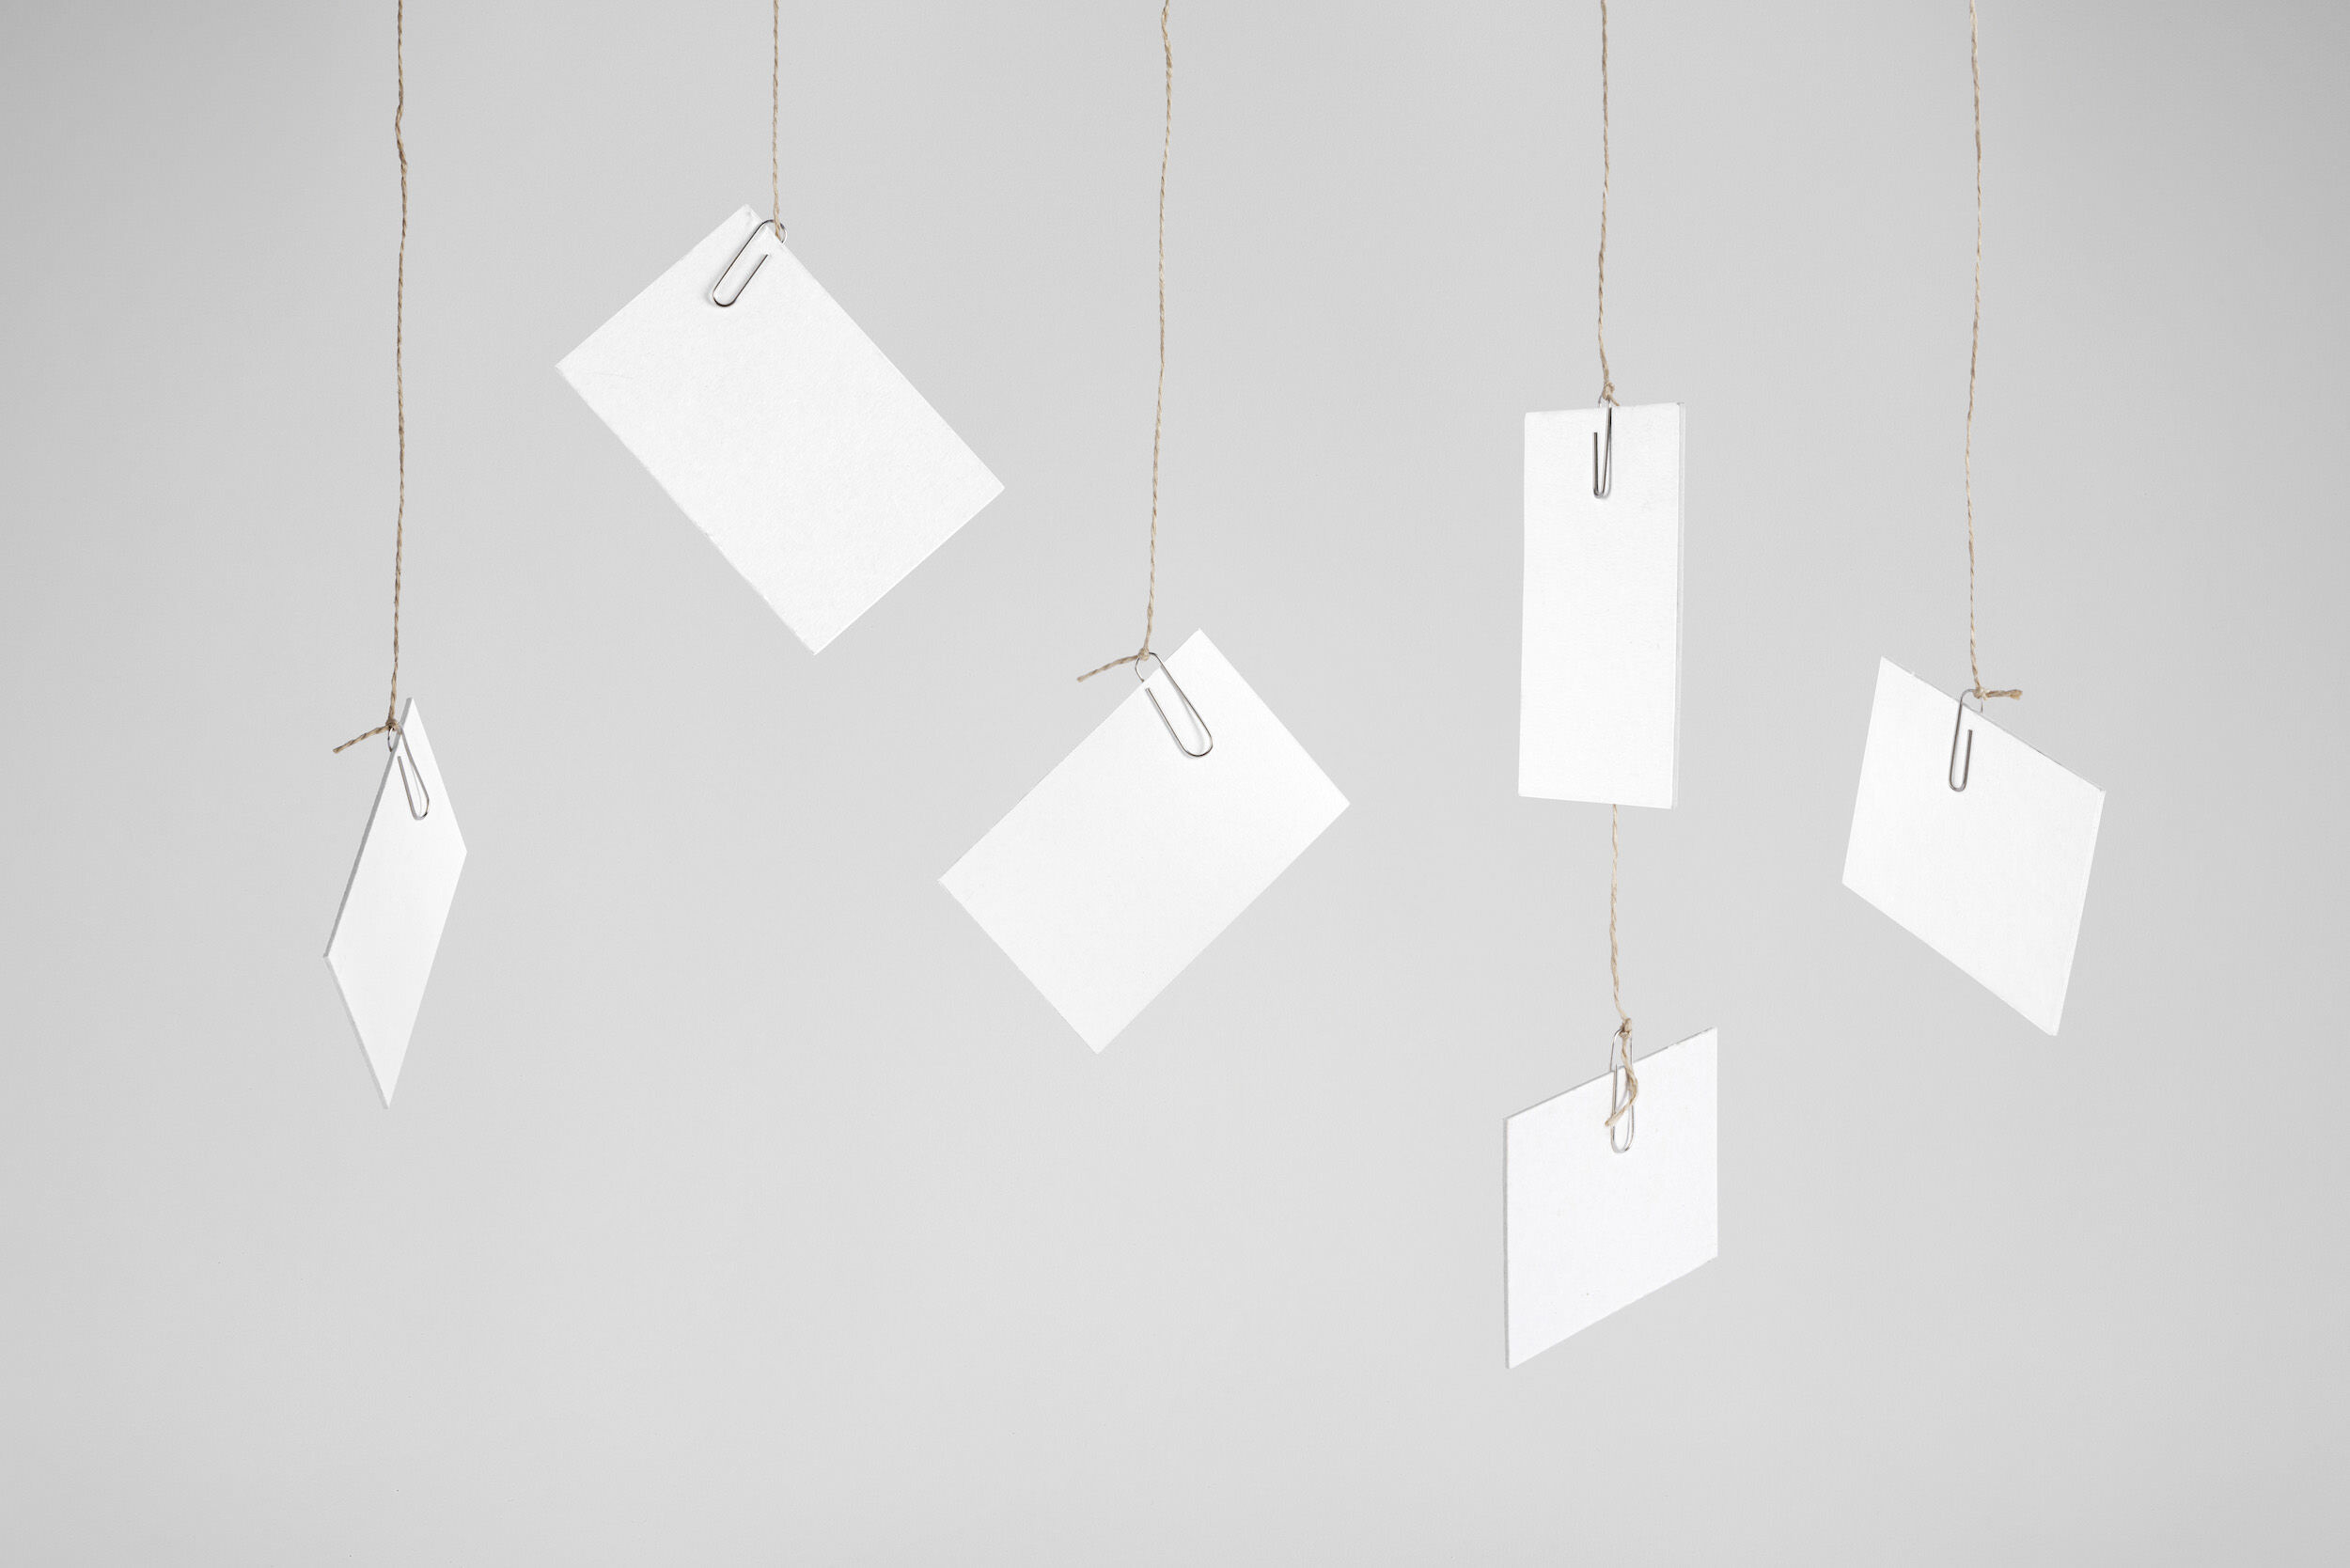 Business Cards Hanged by Strings and Clips Mockup FREE PSD